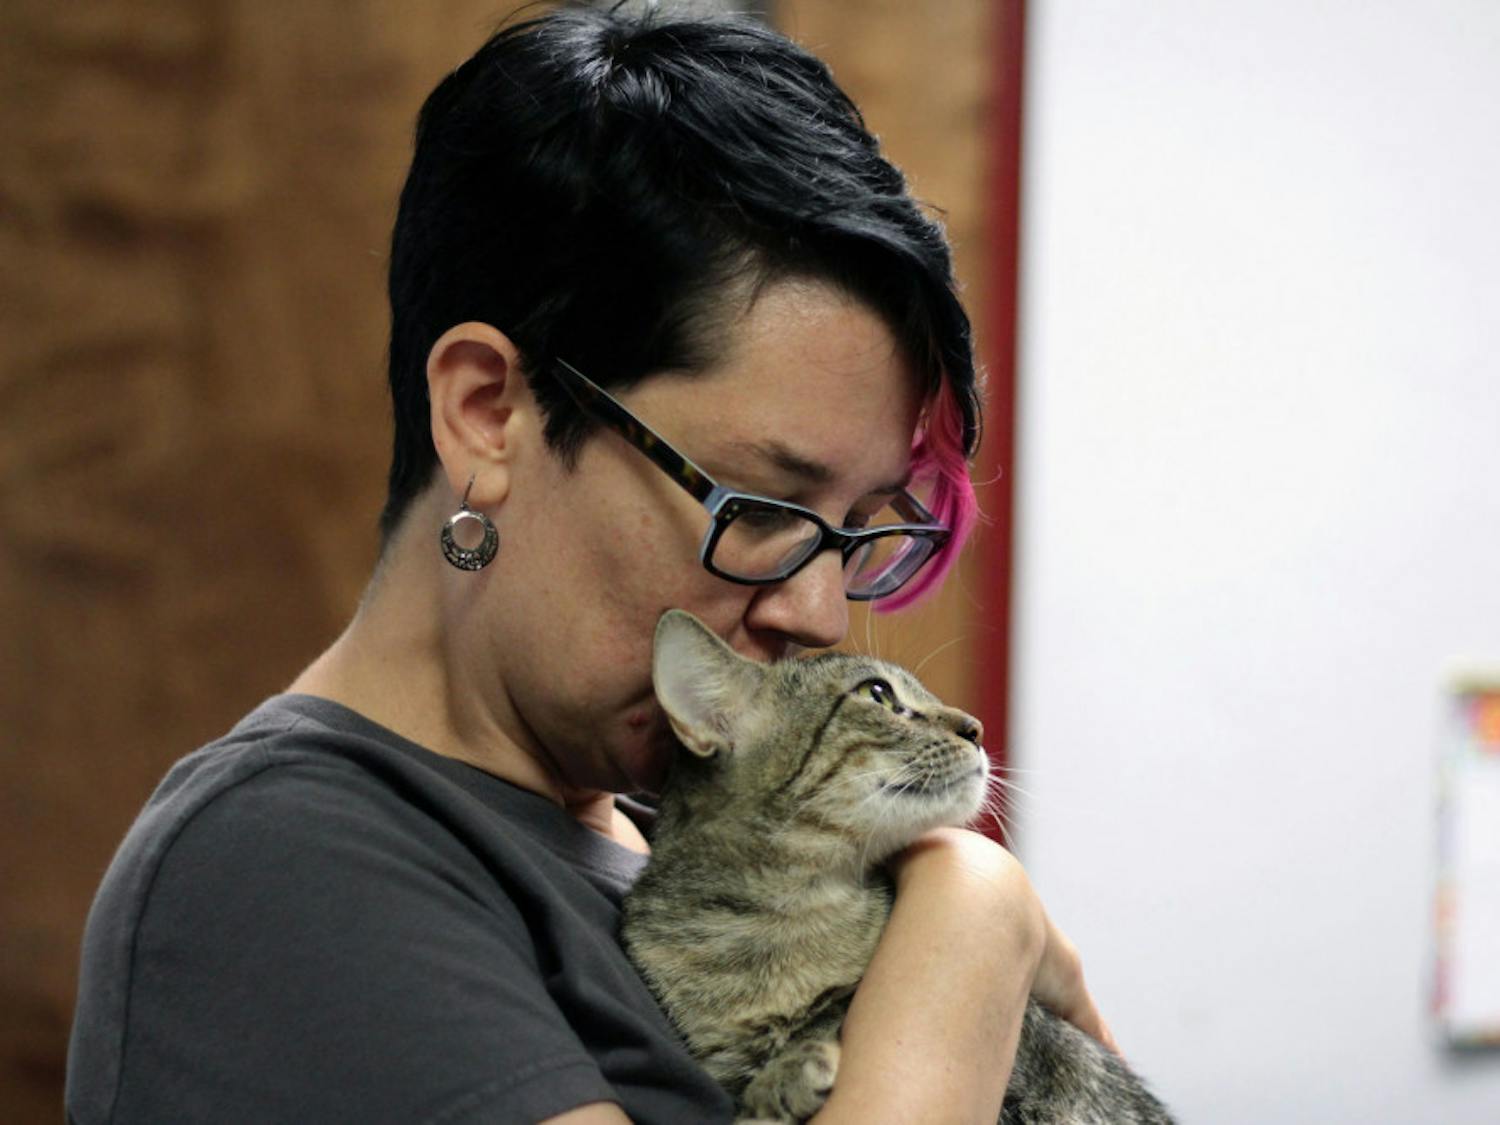 Gainesville resident Amber Young-Parker, 44, holds her new foster cat, Carmilla, at the Alachua County Humane Society. Young-Parker is fostering the cat for two weeks to help the shelter before Hurricane Irma.